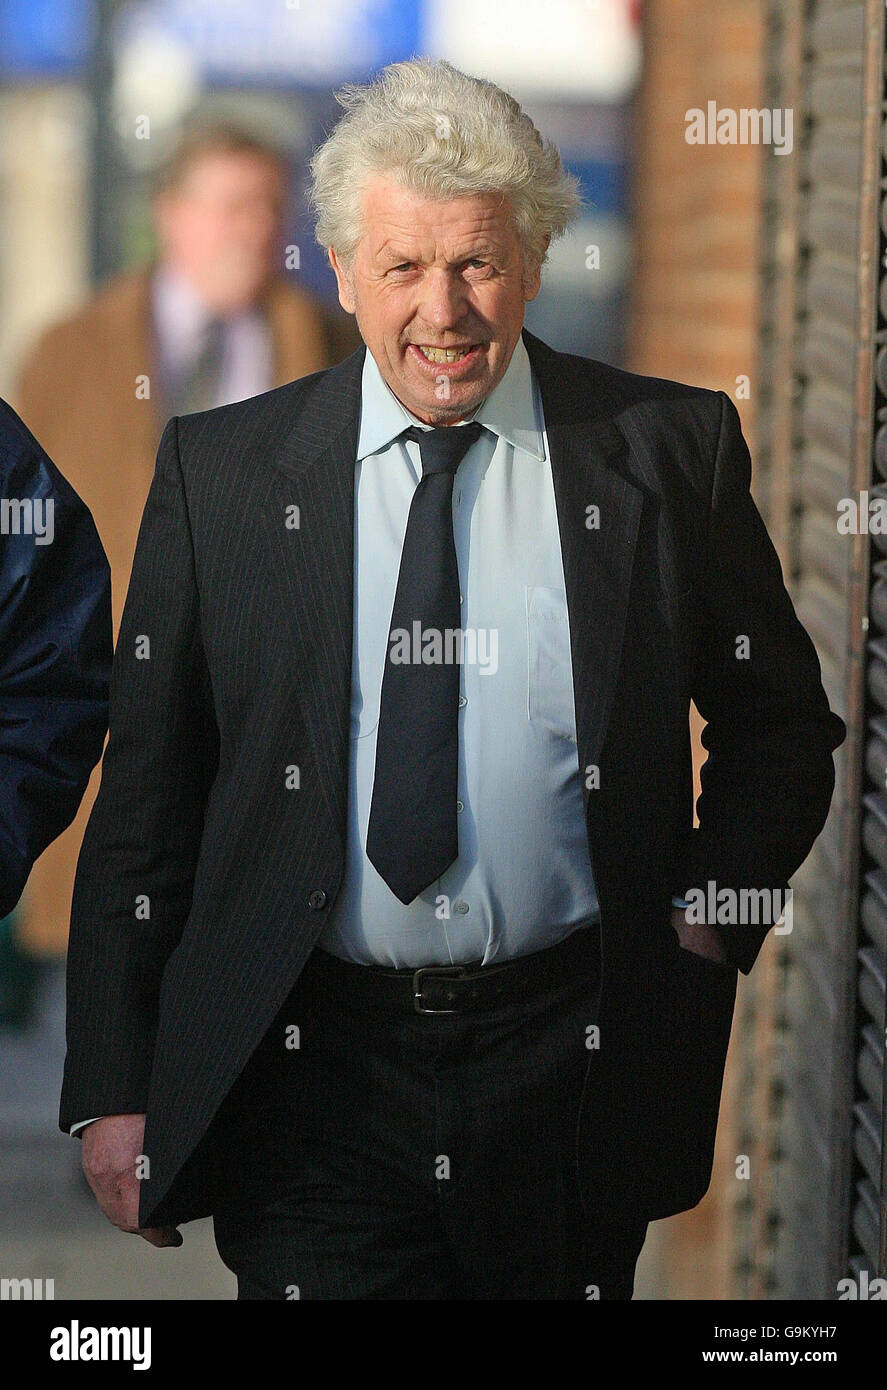 Co Mayo farmer Padraig Nally, 62, arrives at Dublin's Central Criminal Court where he stands accused of murder. Stock Photo